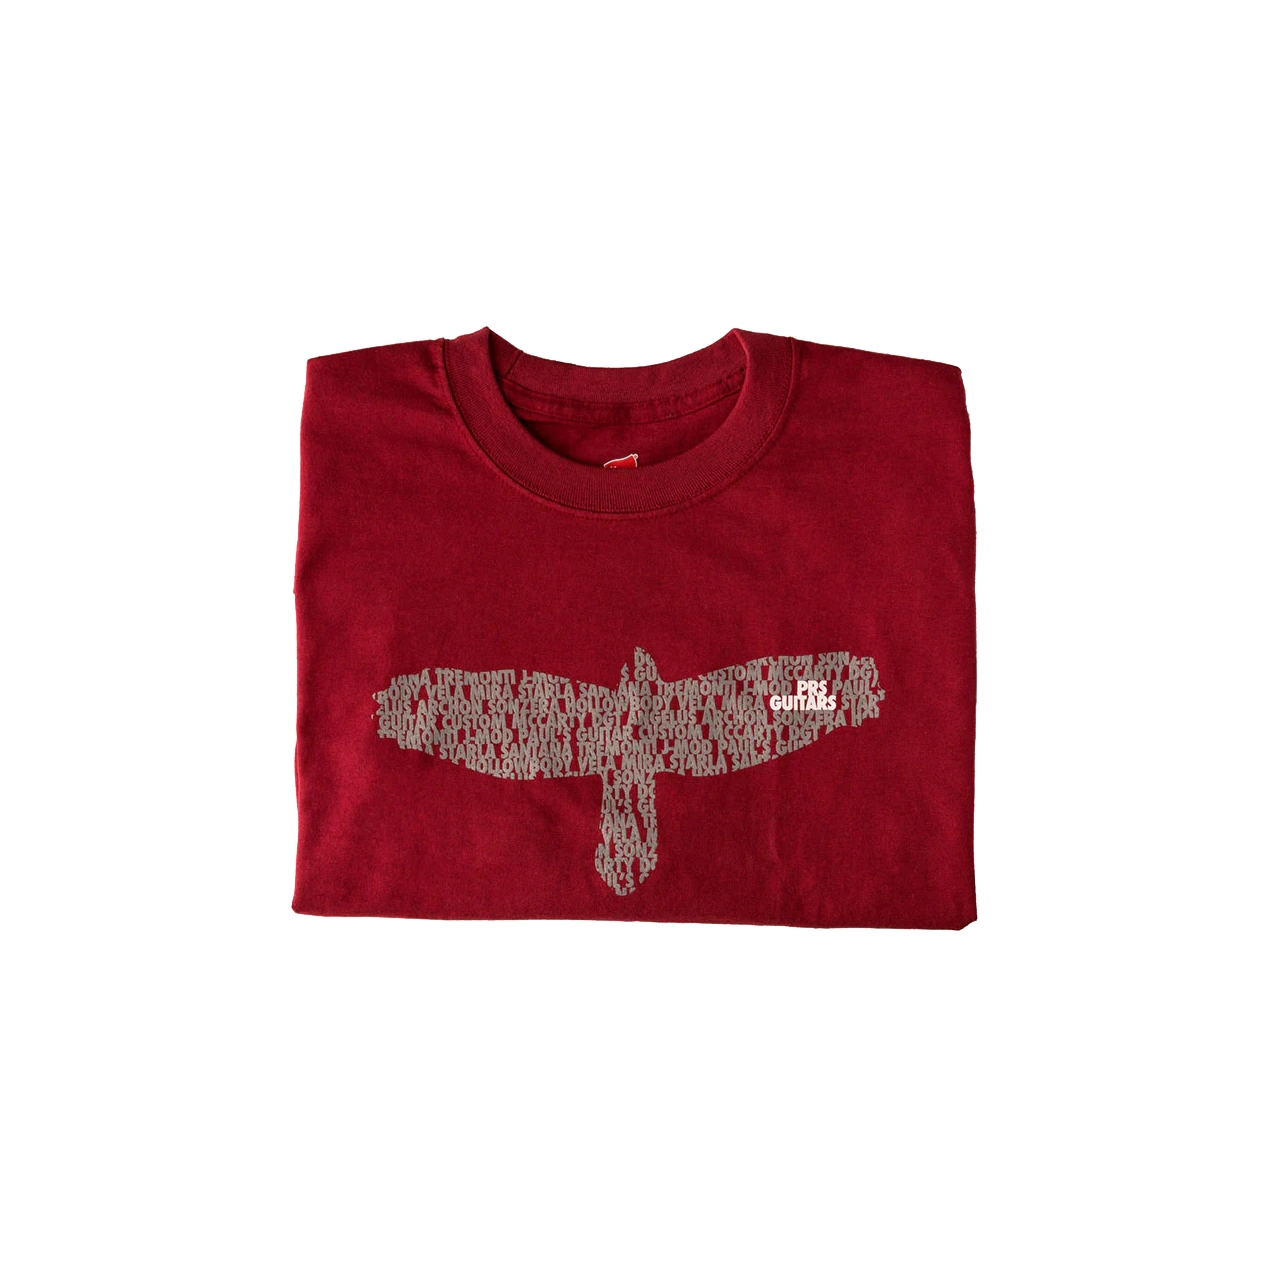 PRS "Bird as a Word" Tee | Oxblood Red - X-Large